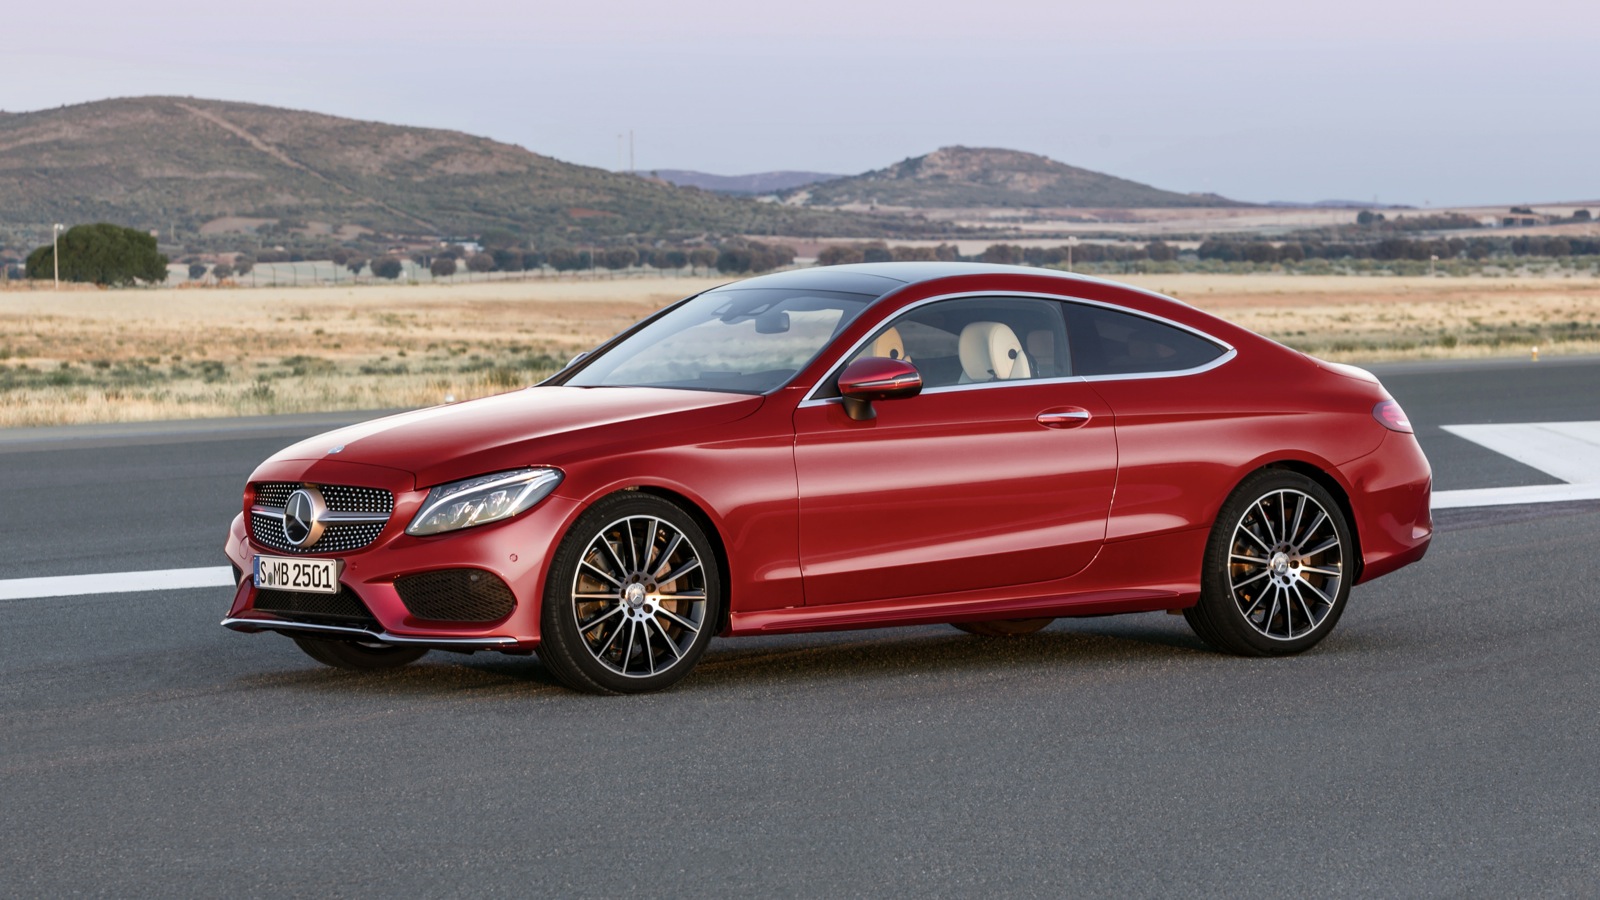 Mercedes benz c class coupe price south africa